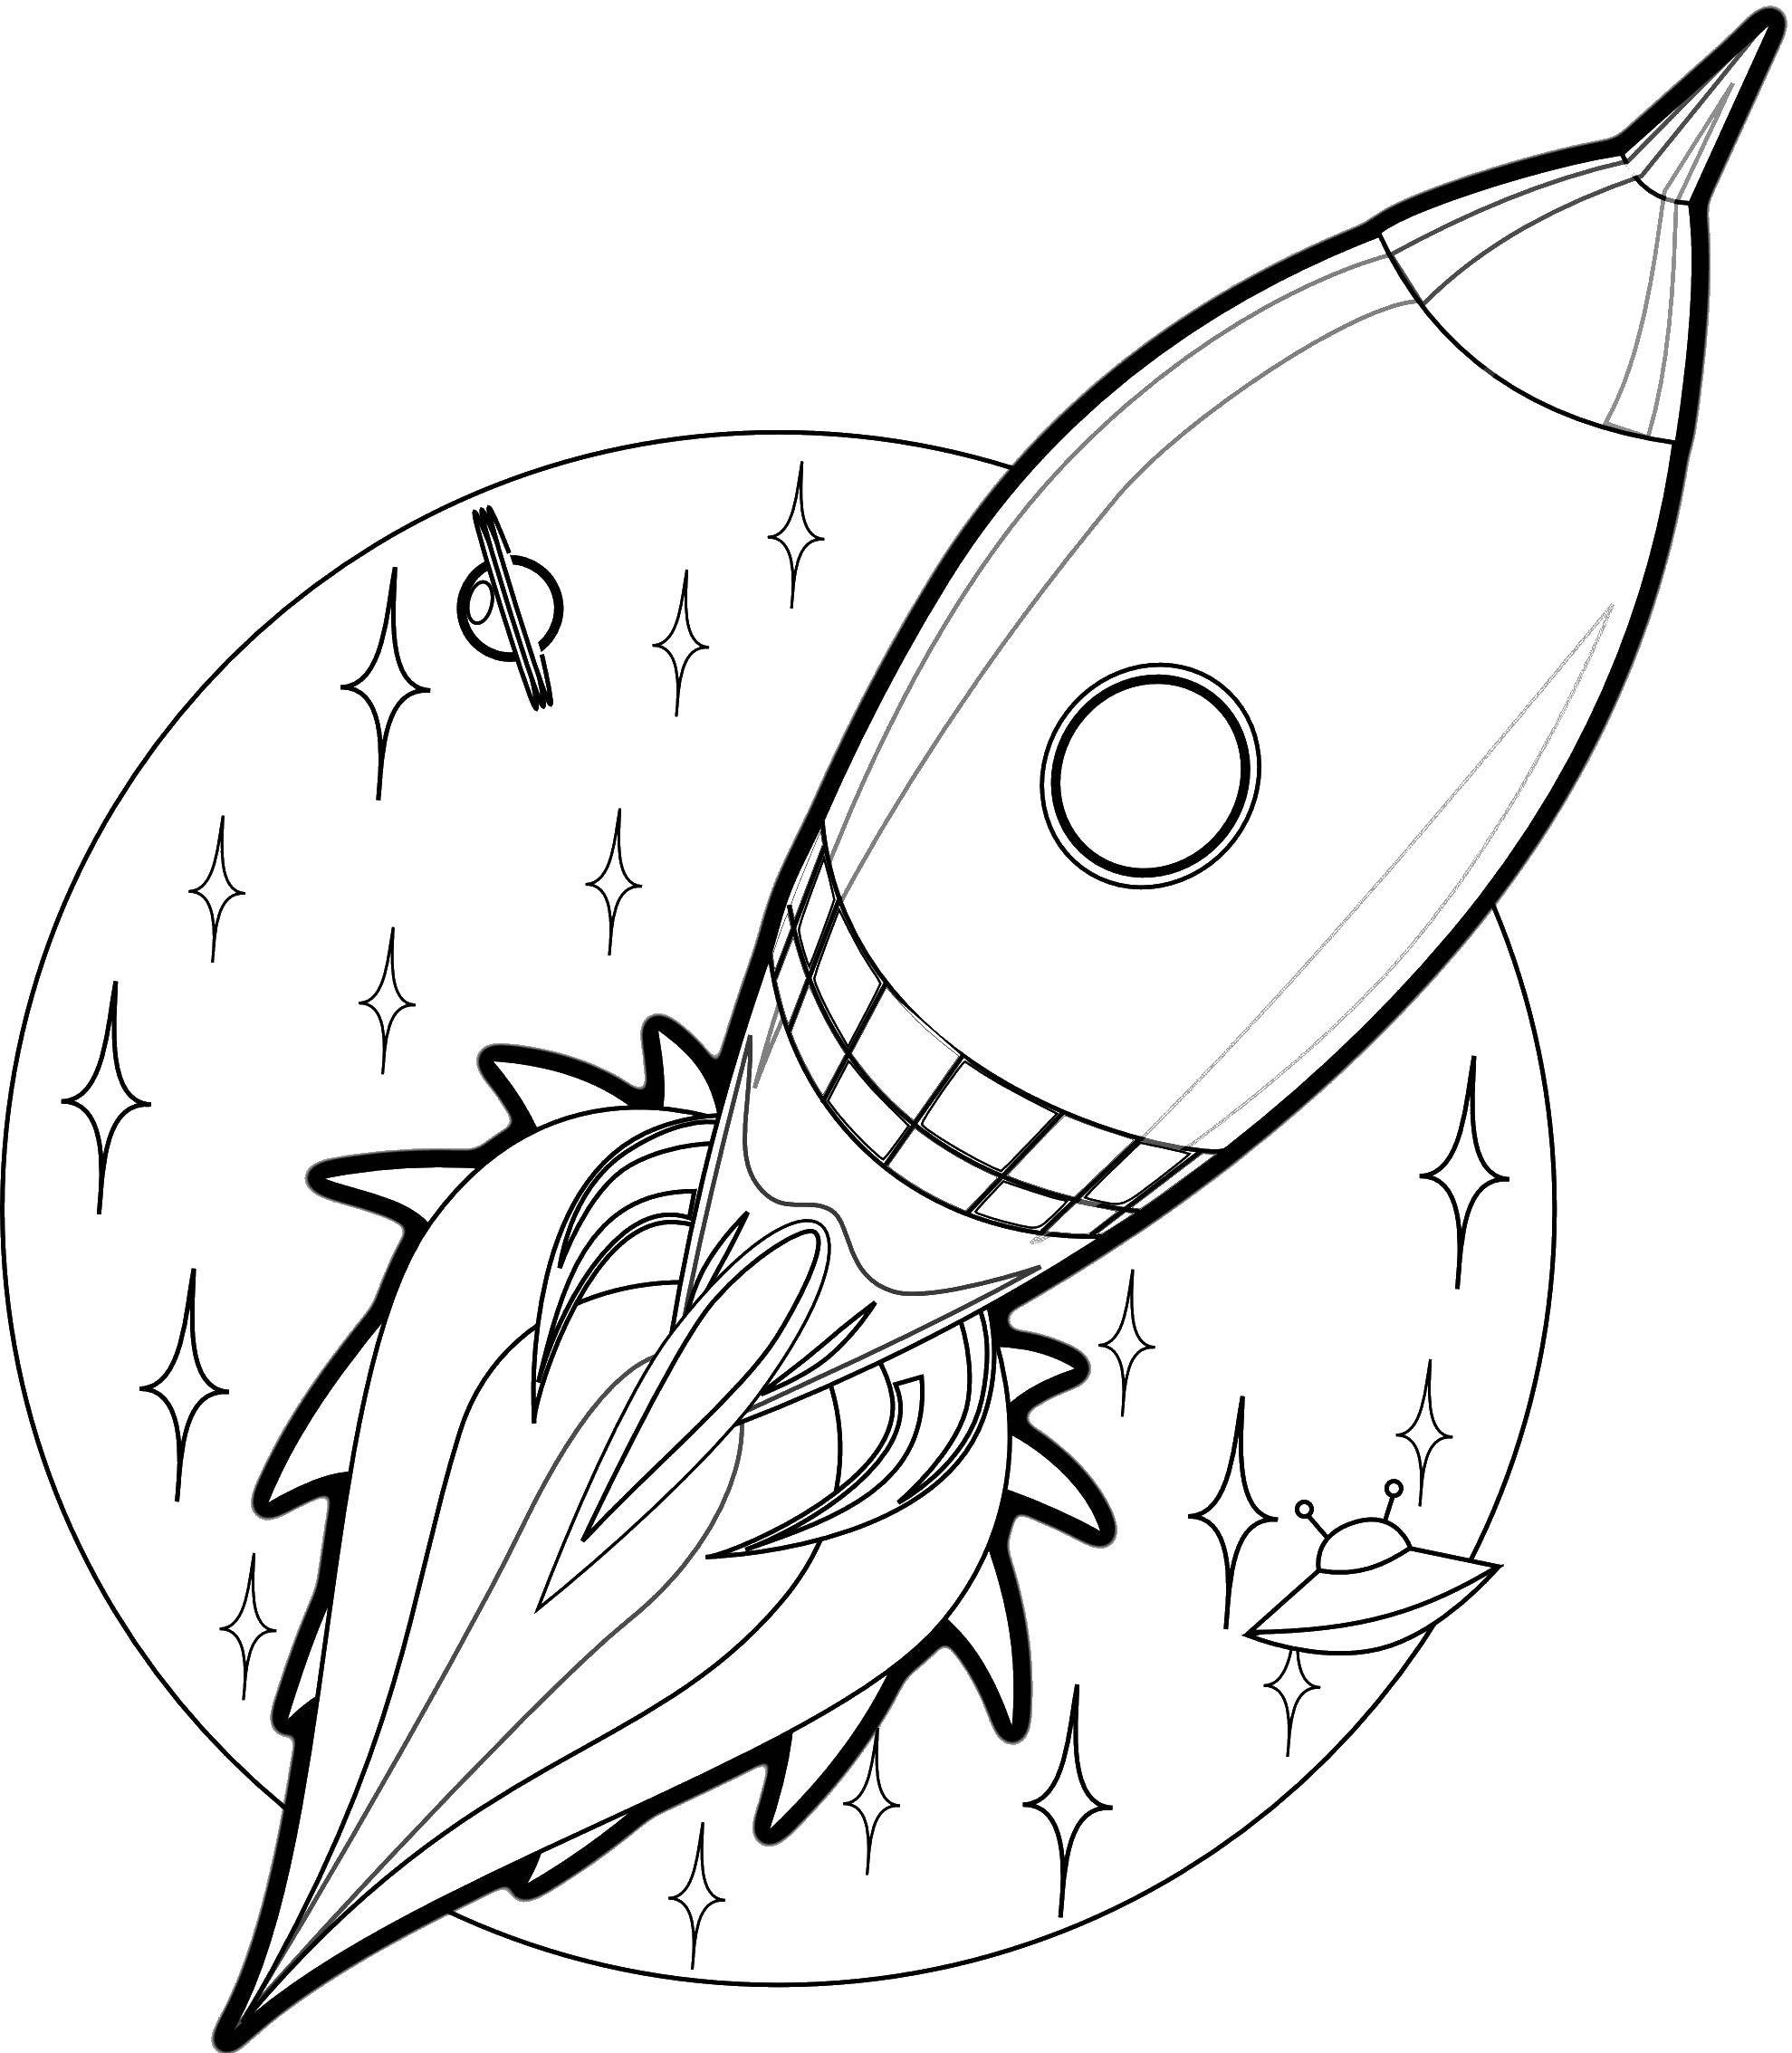 Coloring Space rocket. Category rockets. Tags:  space, missiles, ships, planet.